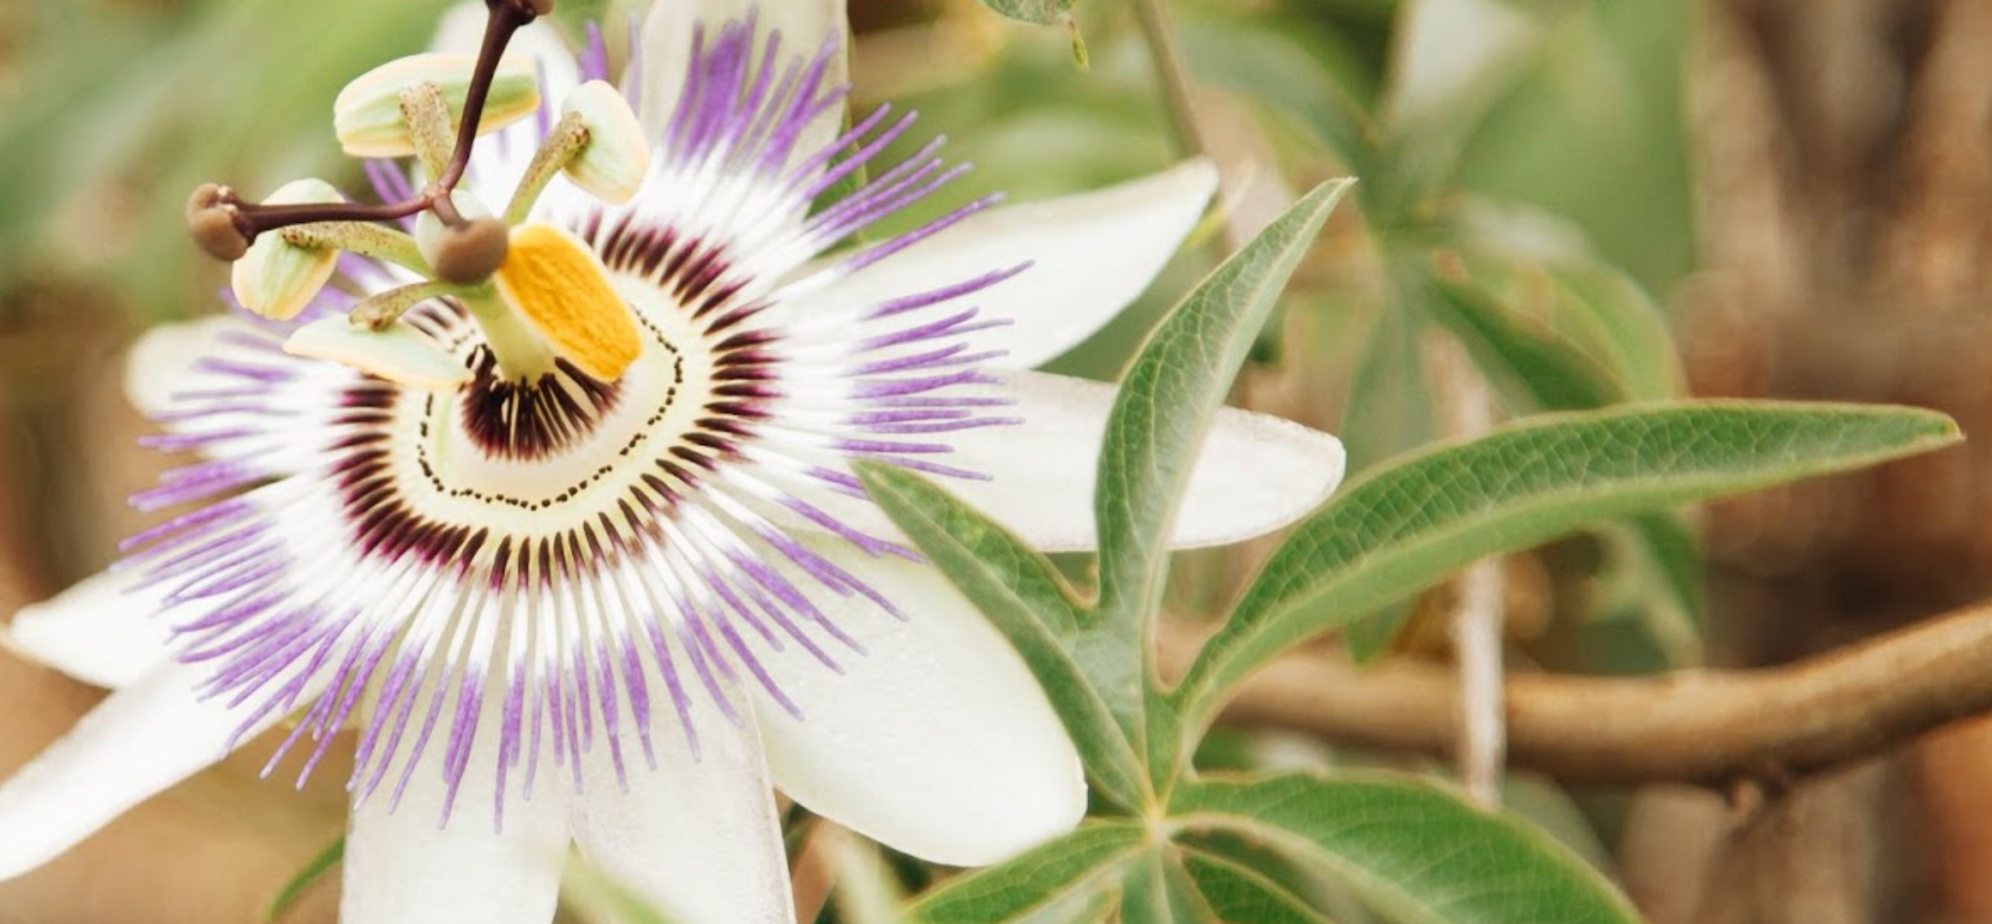 Close-up of purple and white passionflower